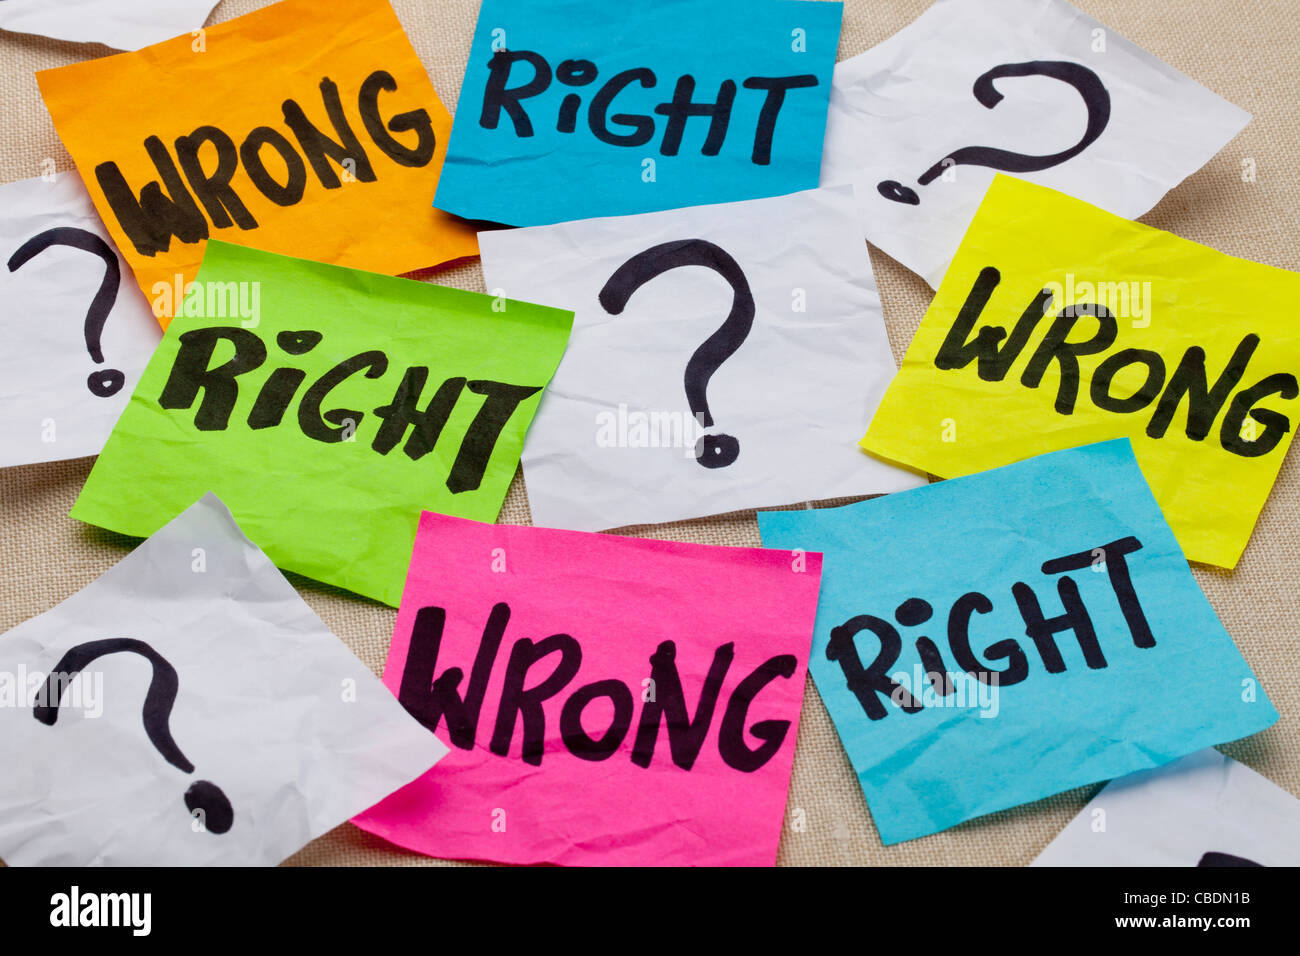 wrong or right dilemma or ethical question - handwriting on colorful sticky notes Stock Photo